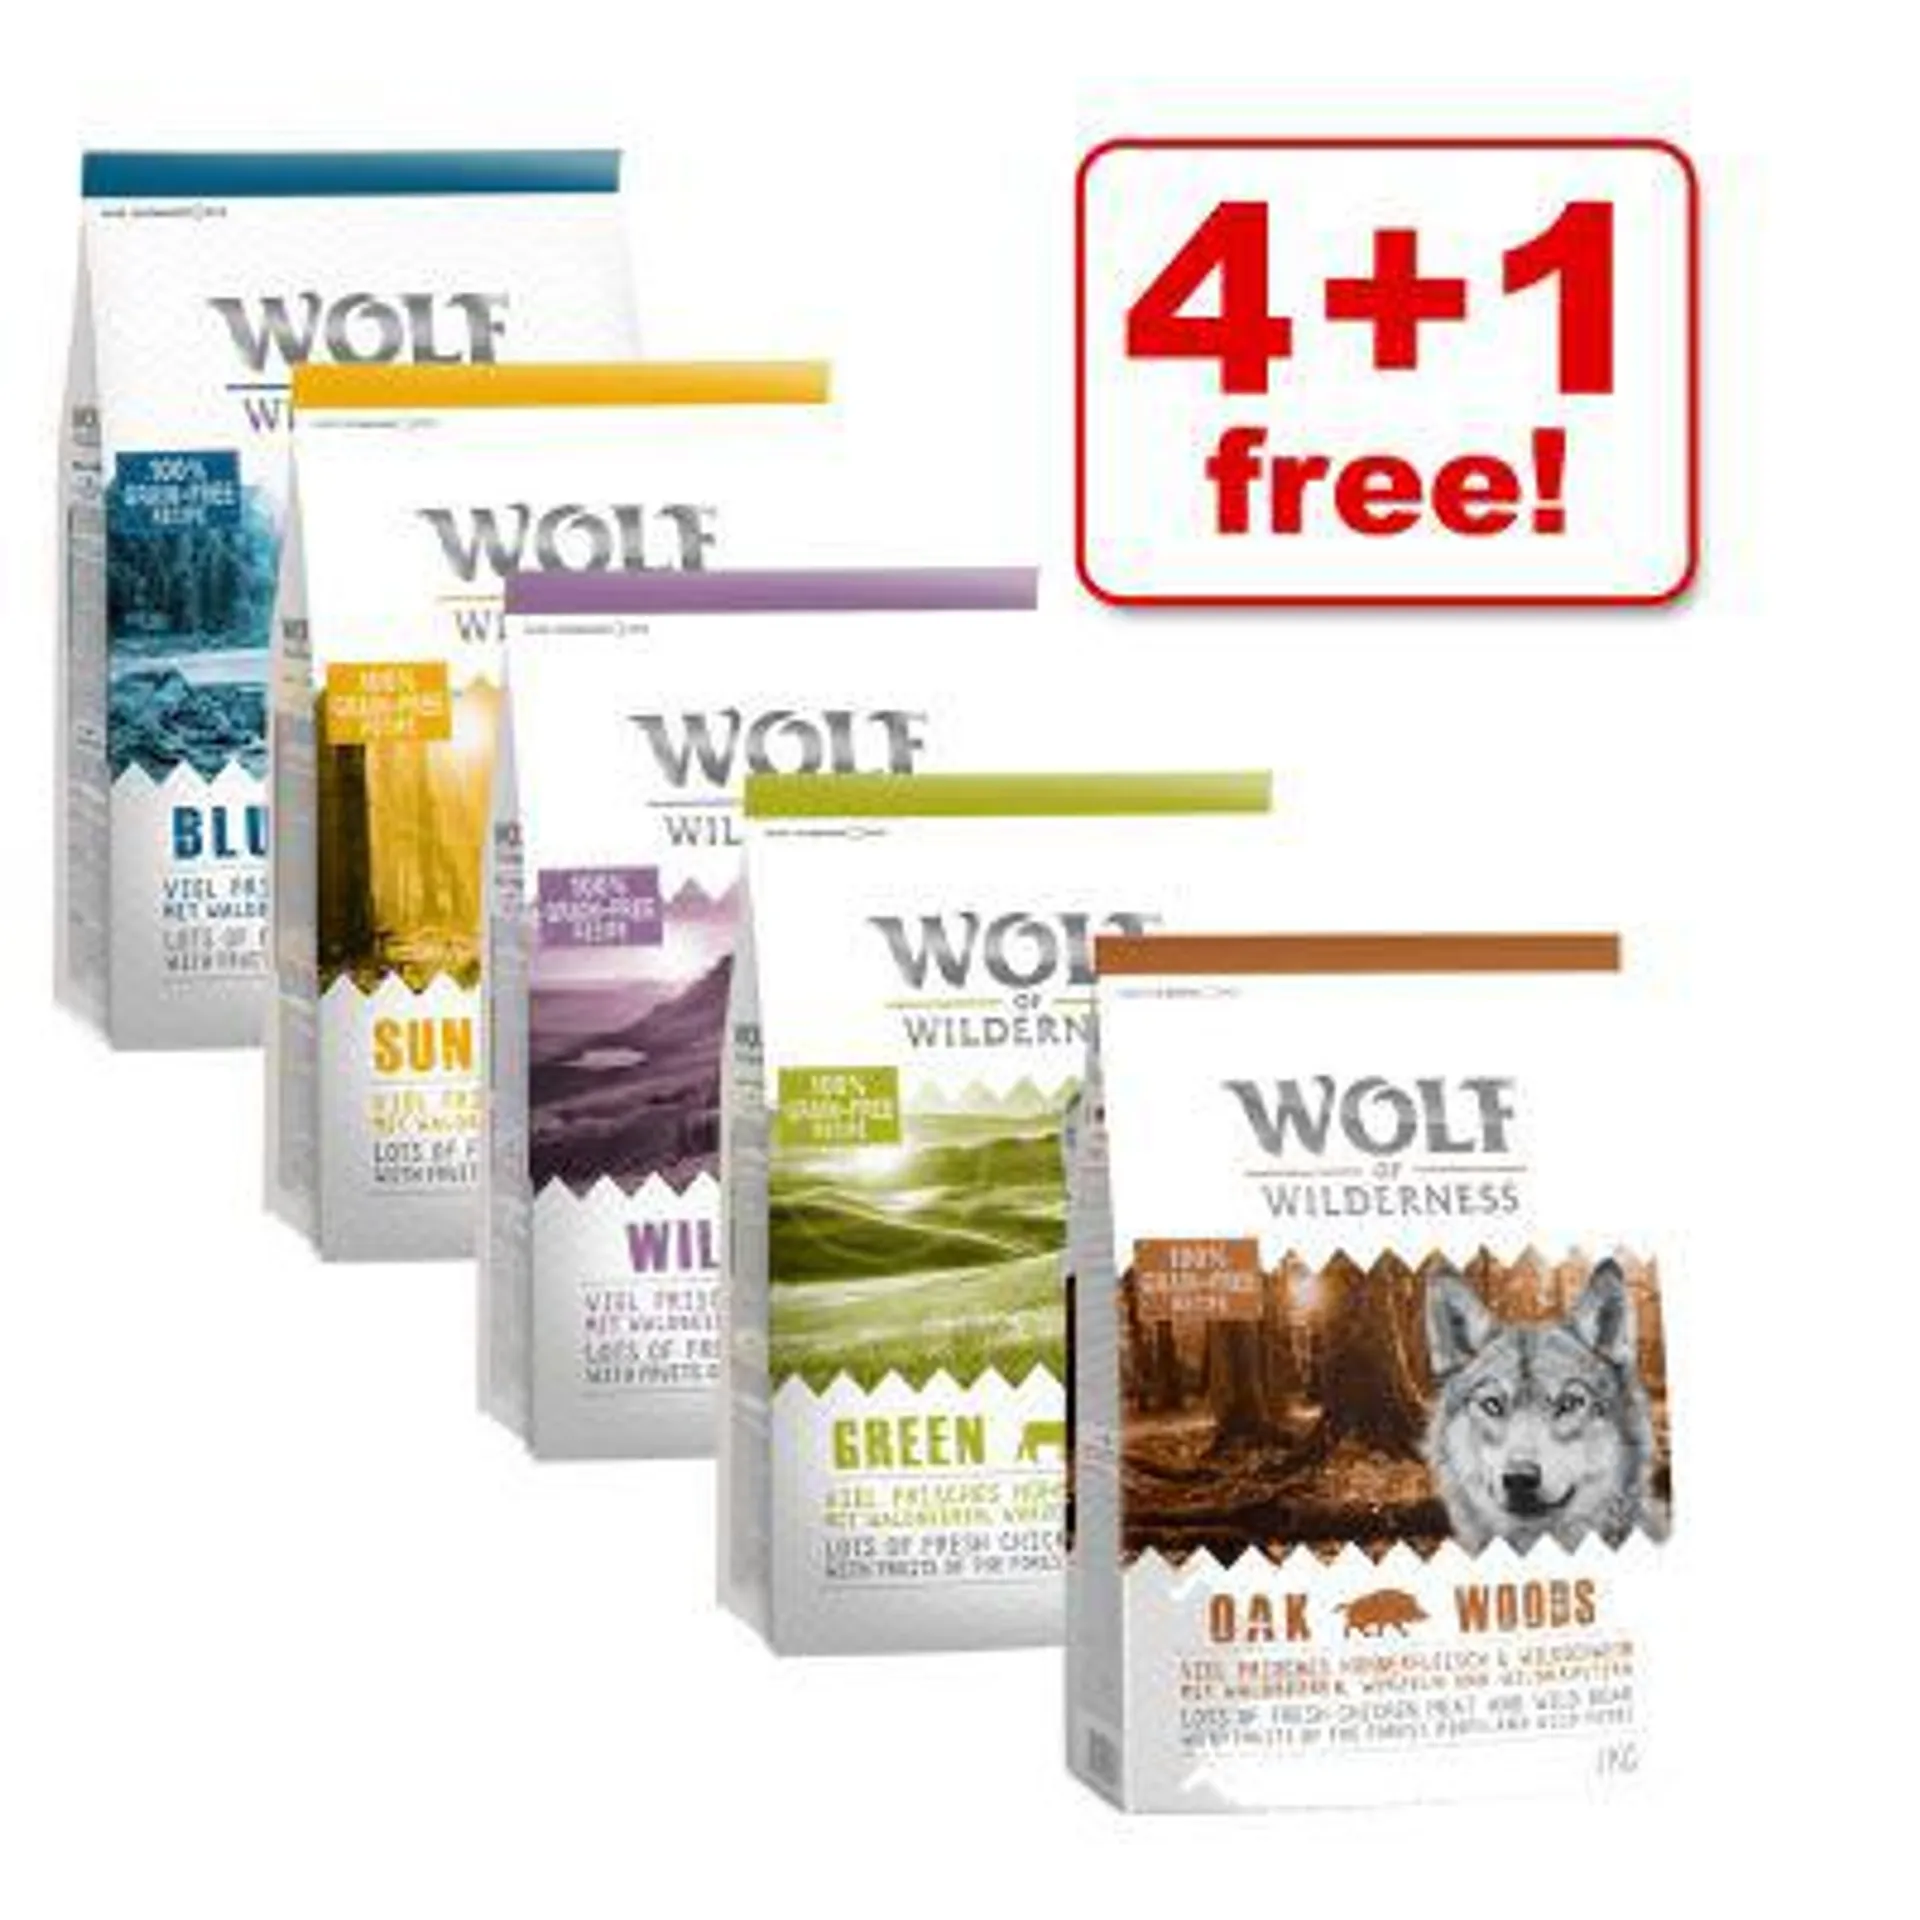 5 x 1kg Wolf of Wilderness Classic Mixed Trial Pack Dry Dog Food - 4 + 1 Free!*